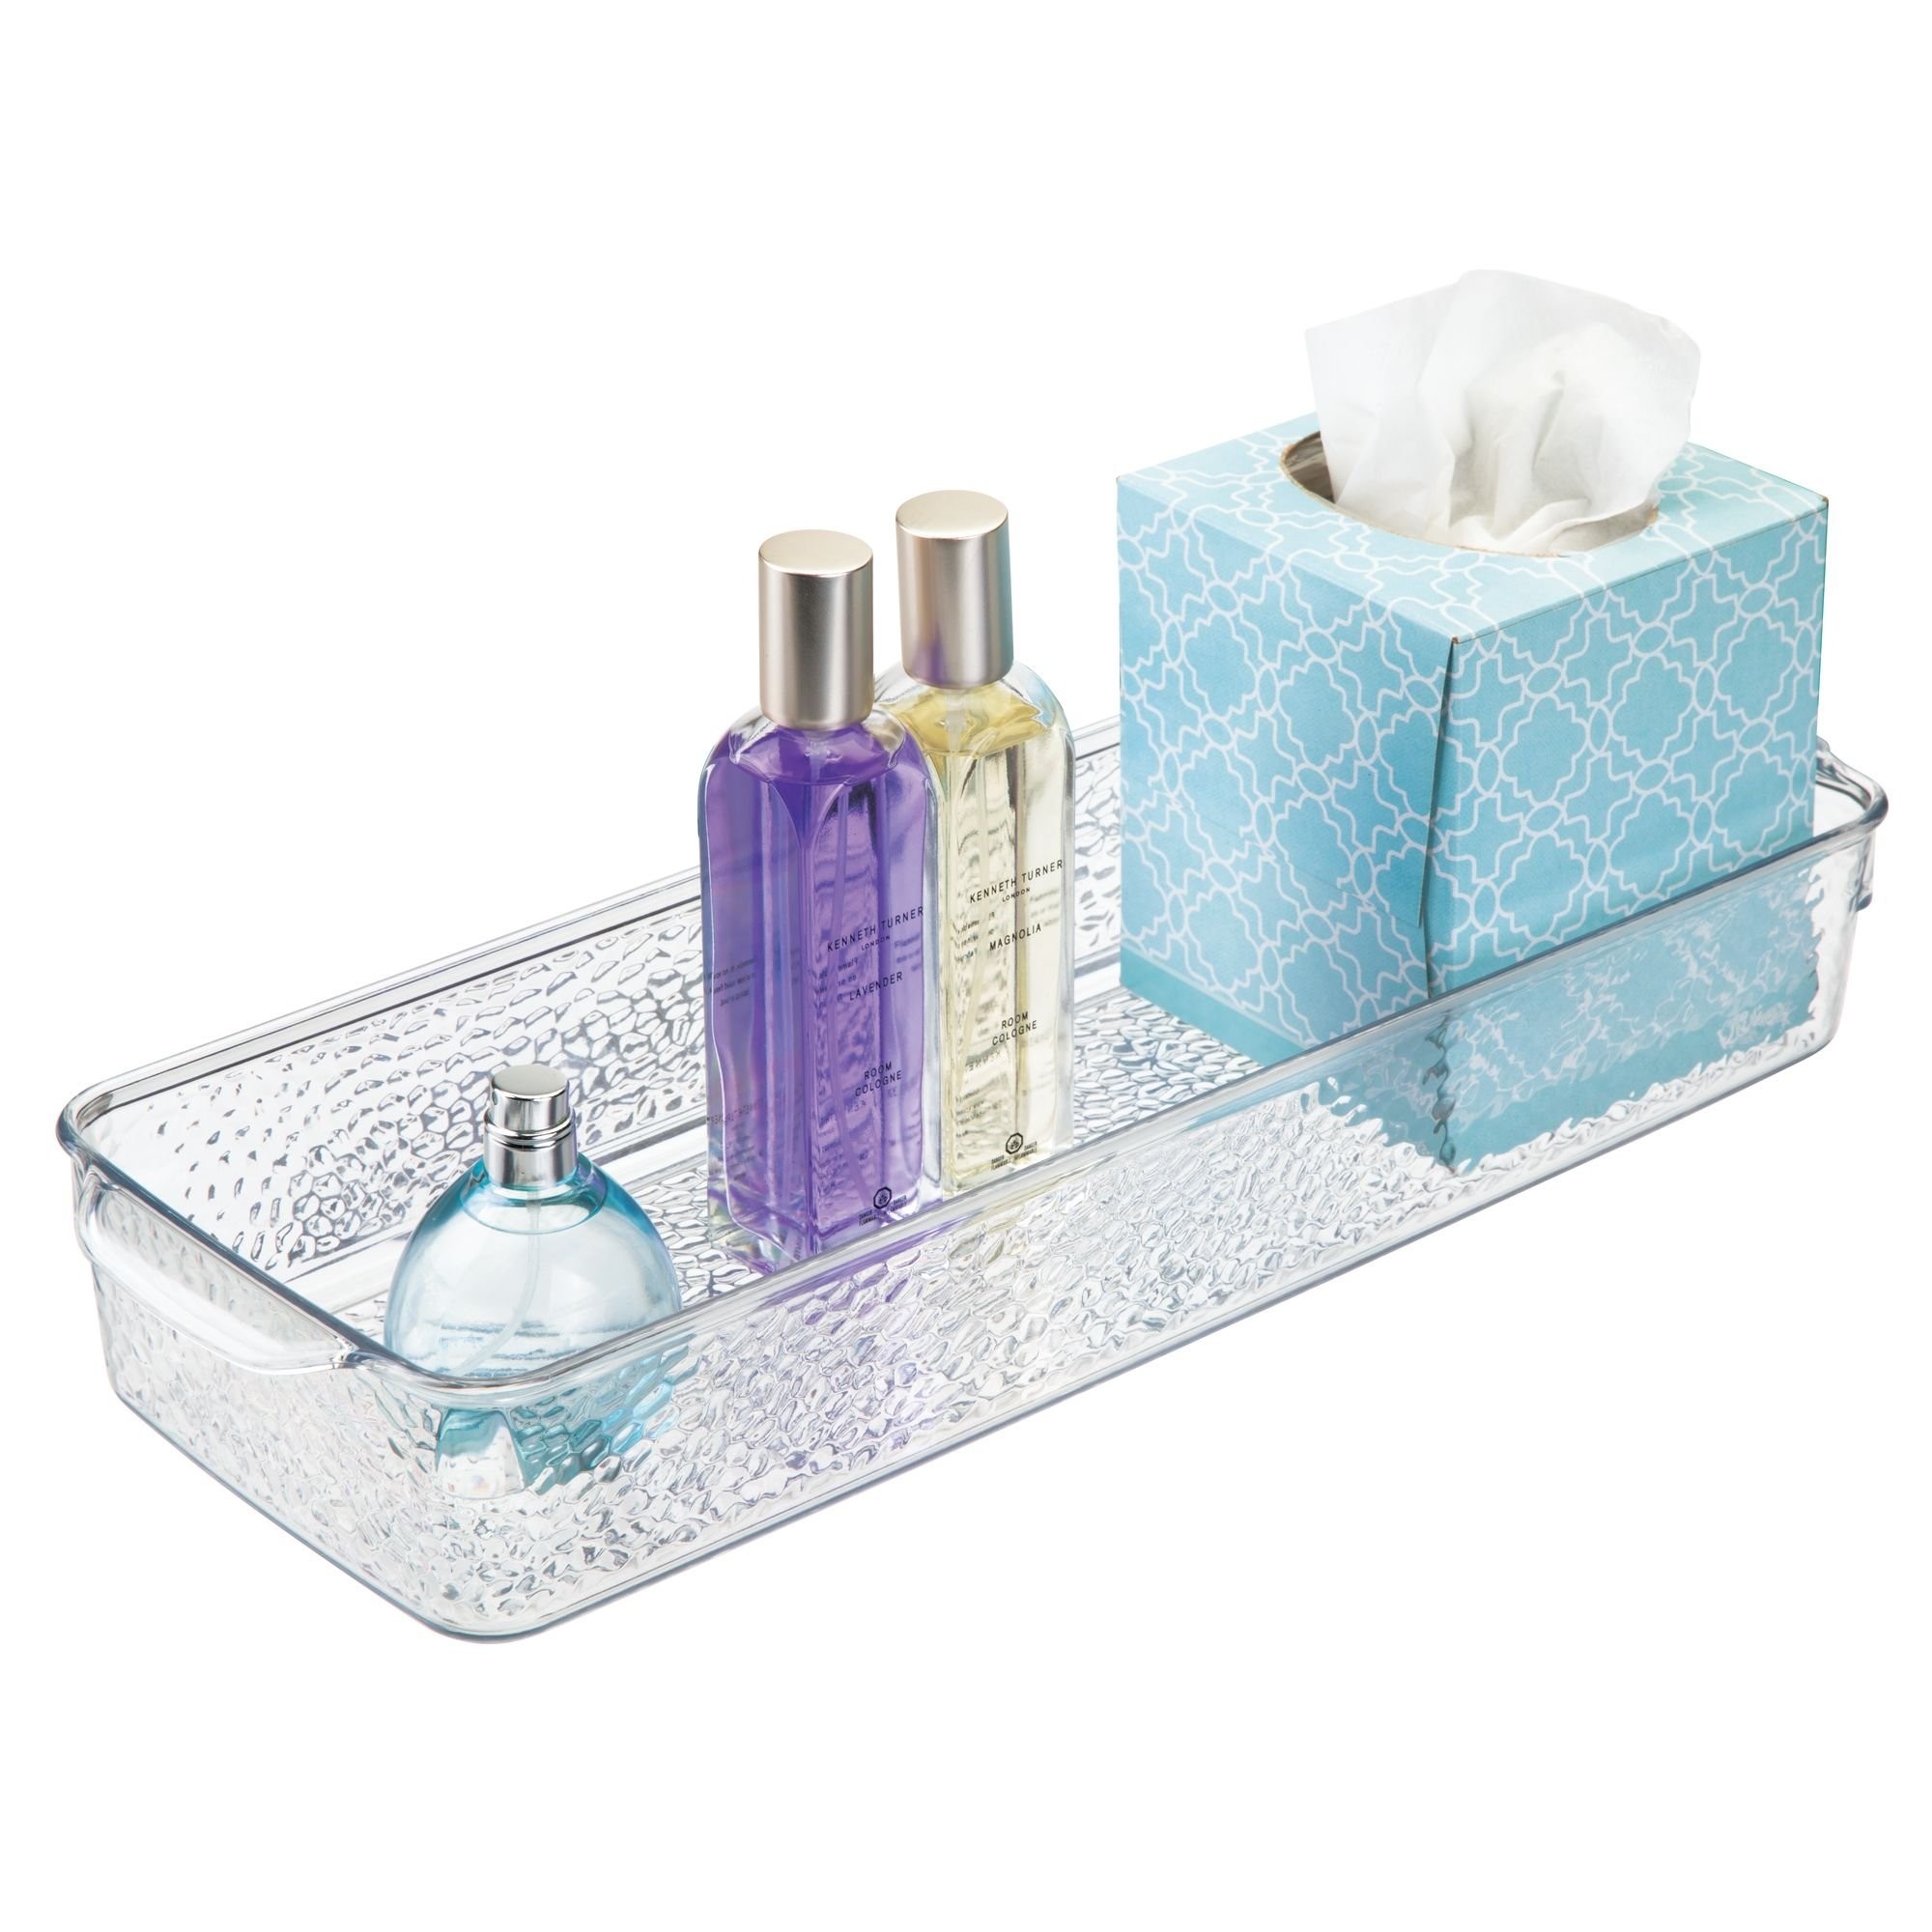 Best rated in bathroom trays holders organizers